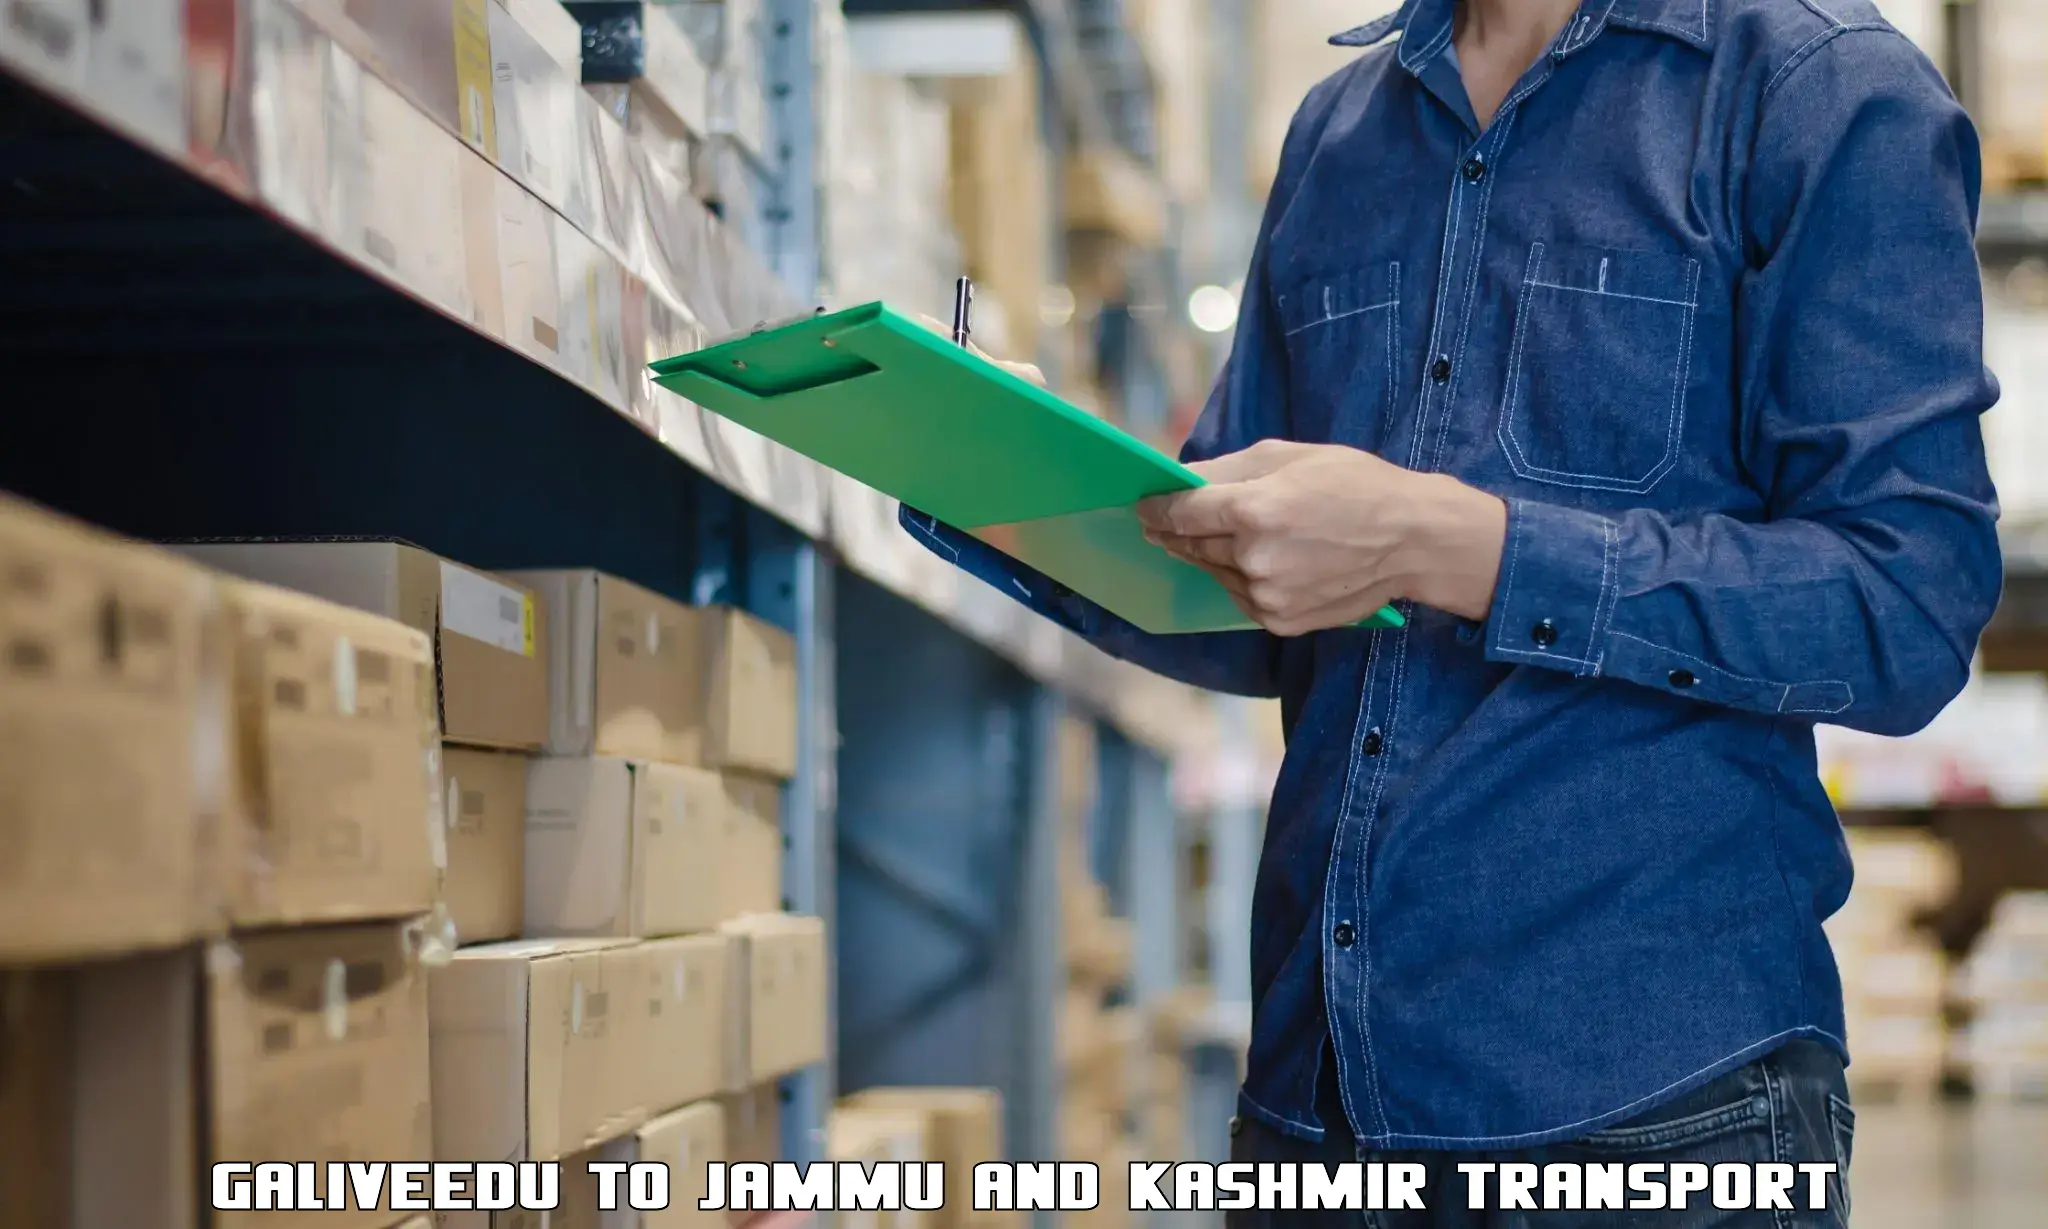 Part load transport service in India Galiveedu to Shopian